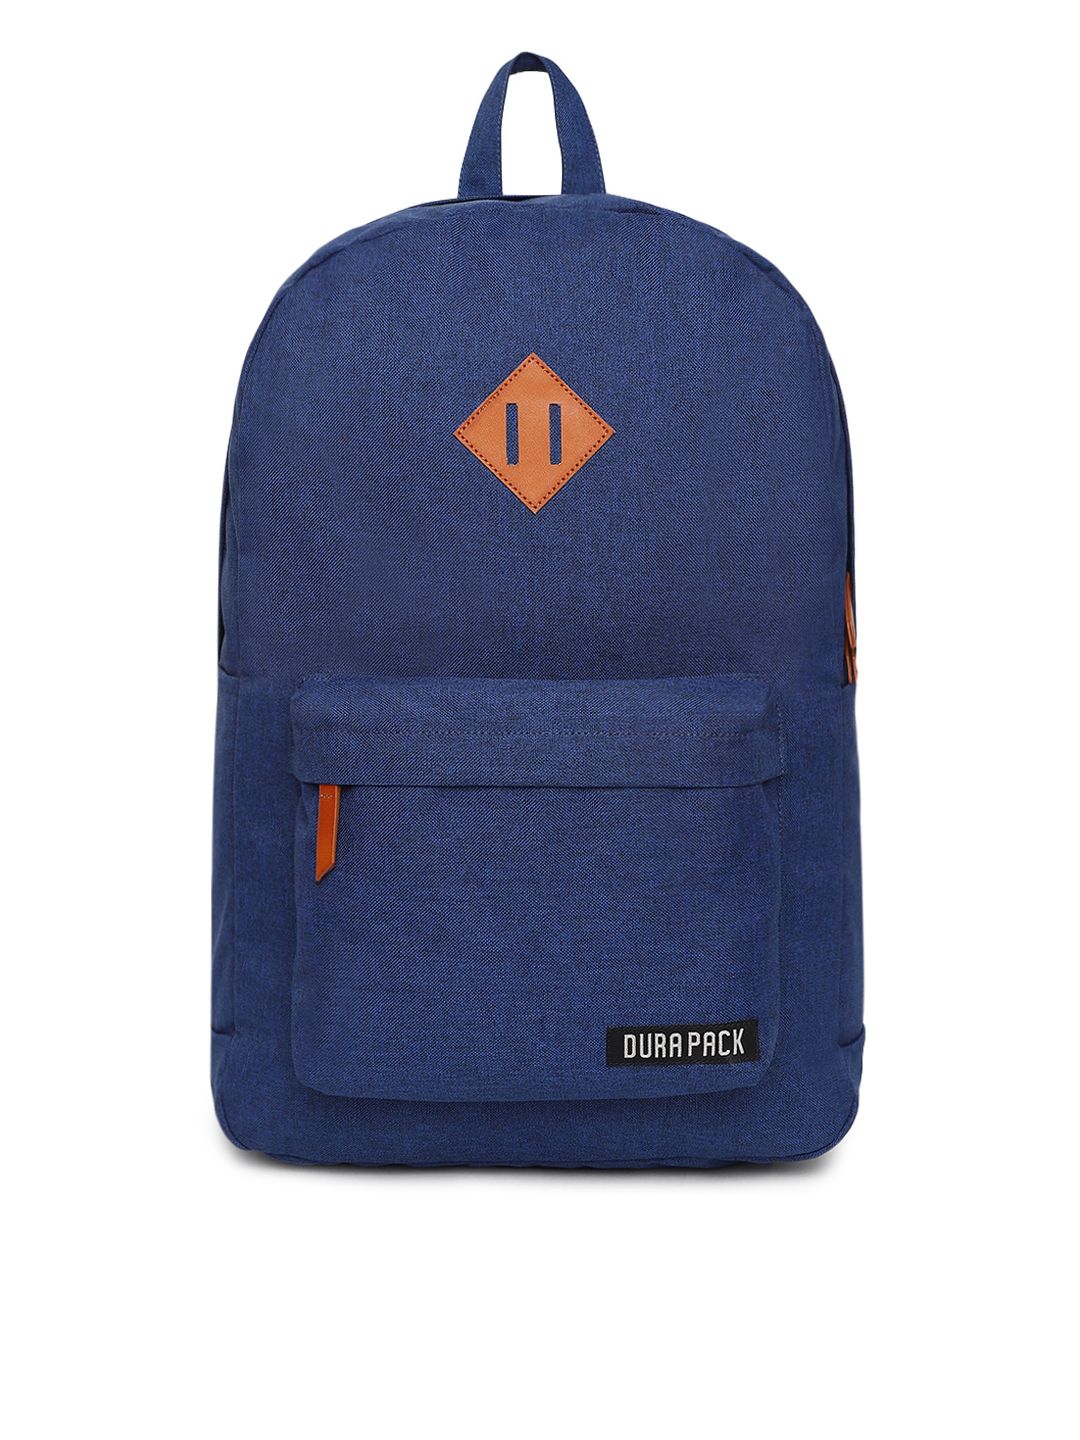 Durapack Unisex Navy Blue Solid Backpack Price in India